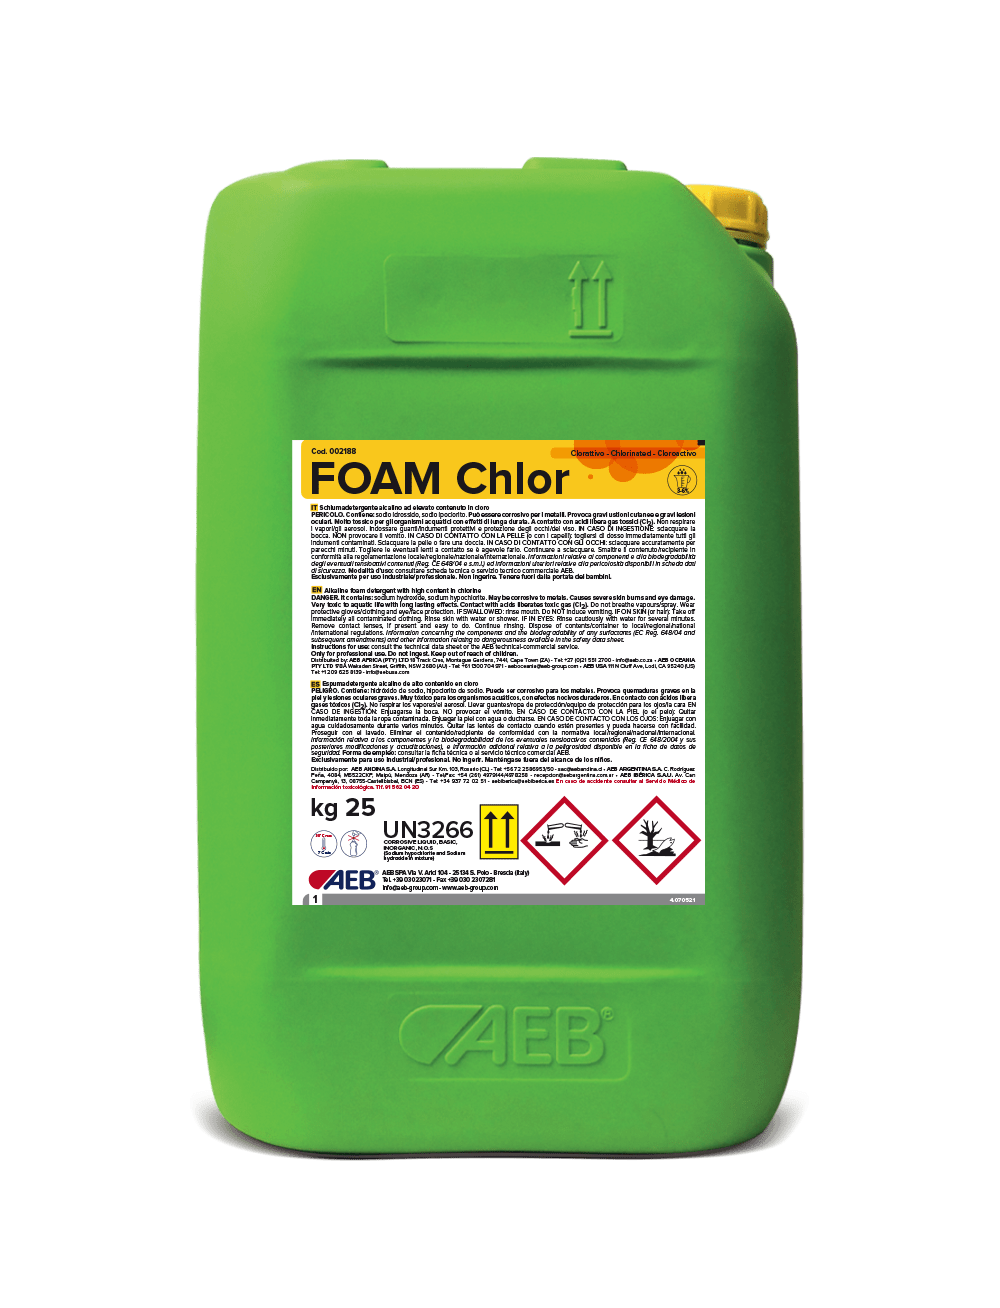 What Causes Foam? - Lo-Chlor Specialty Chemicals